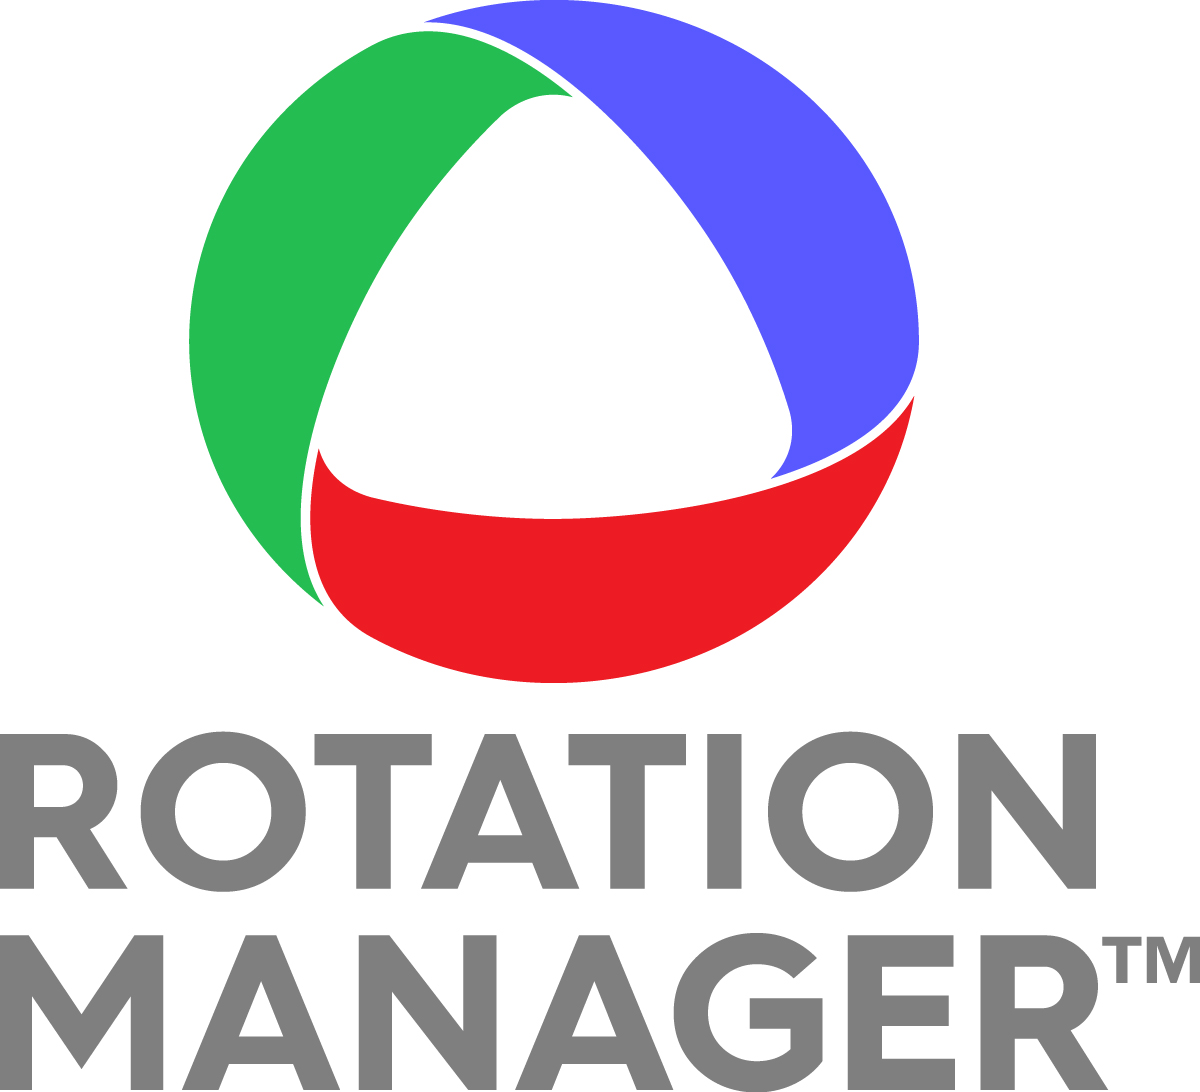 Students Rotation Software, Inc. on Databroker